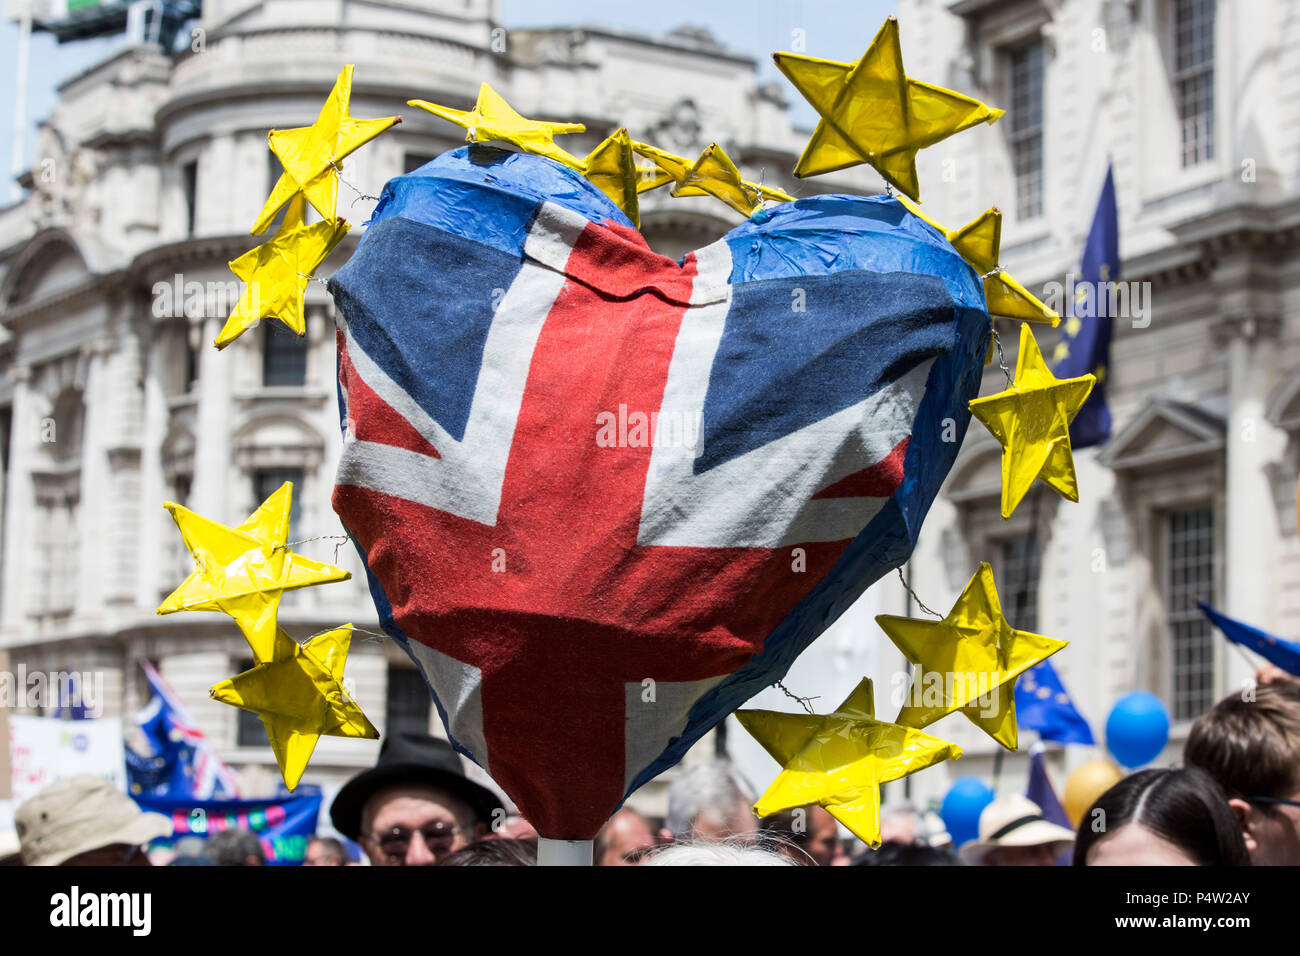 London, UK. 23 June 2018.Anti-Brexit march and rally for a People's Vote in Central London. Union Flag heart surrounded by the yellow stars of the European Union Flag. Stock Photo